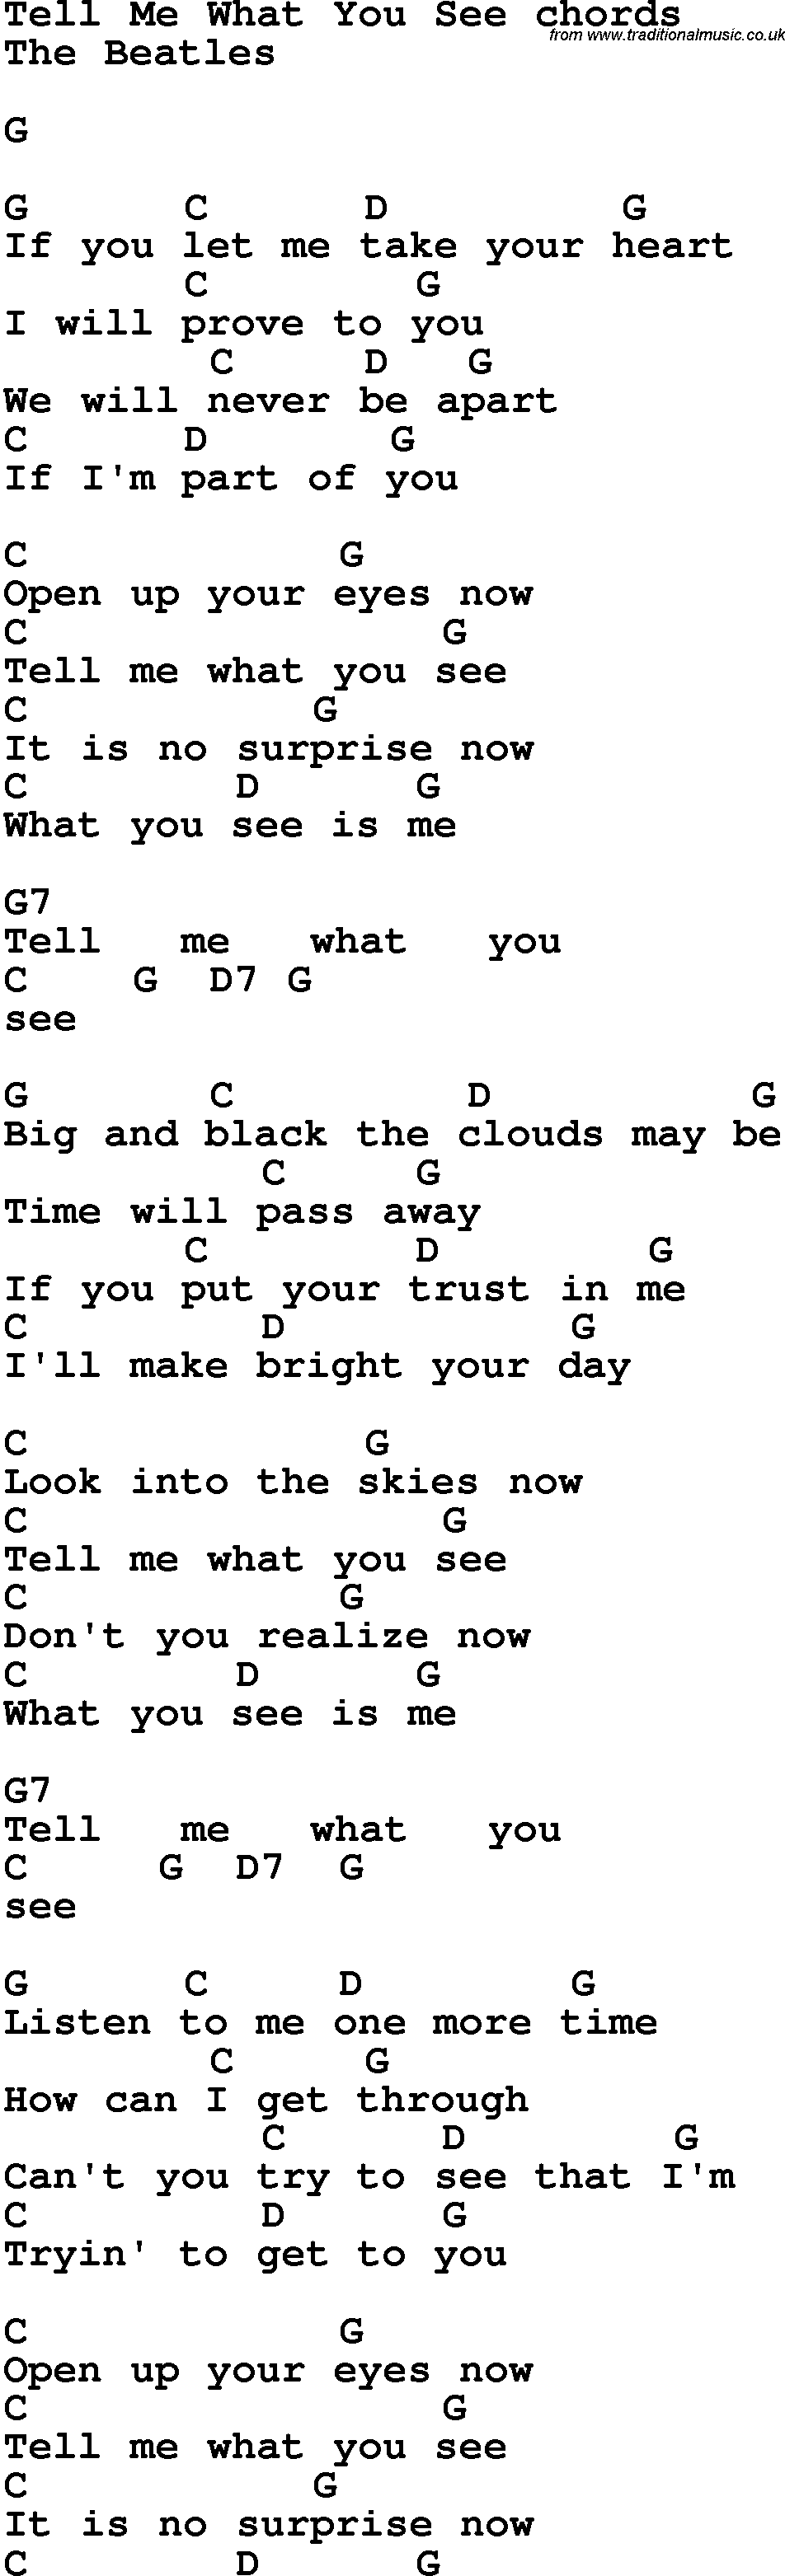 Song Lyrics with guitar chords for Tell Me What You See